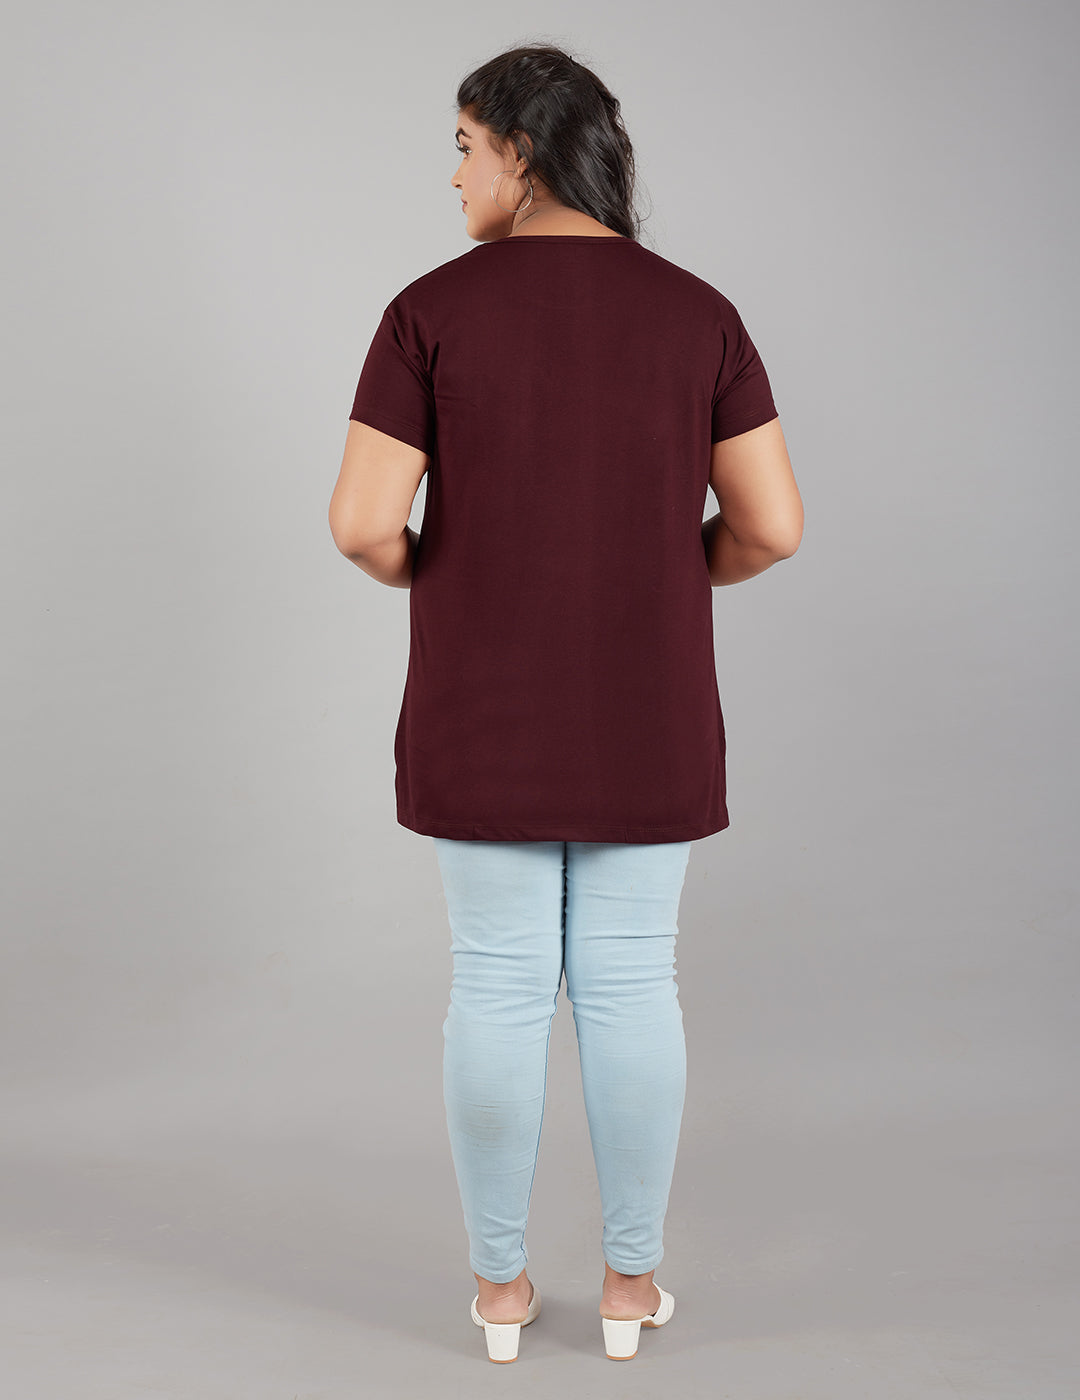 Plus Size Cotton T-shirts For Summer - Wine - At Best Online